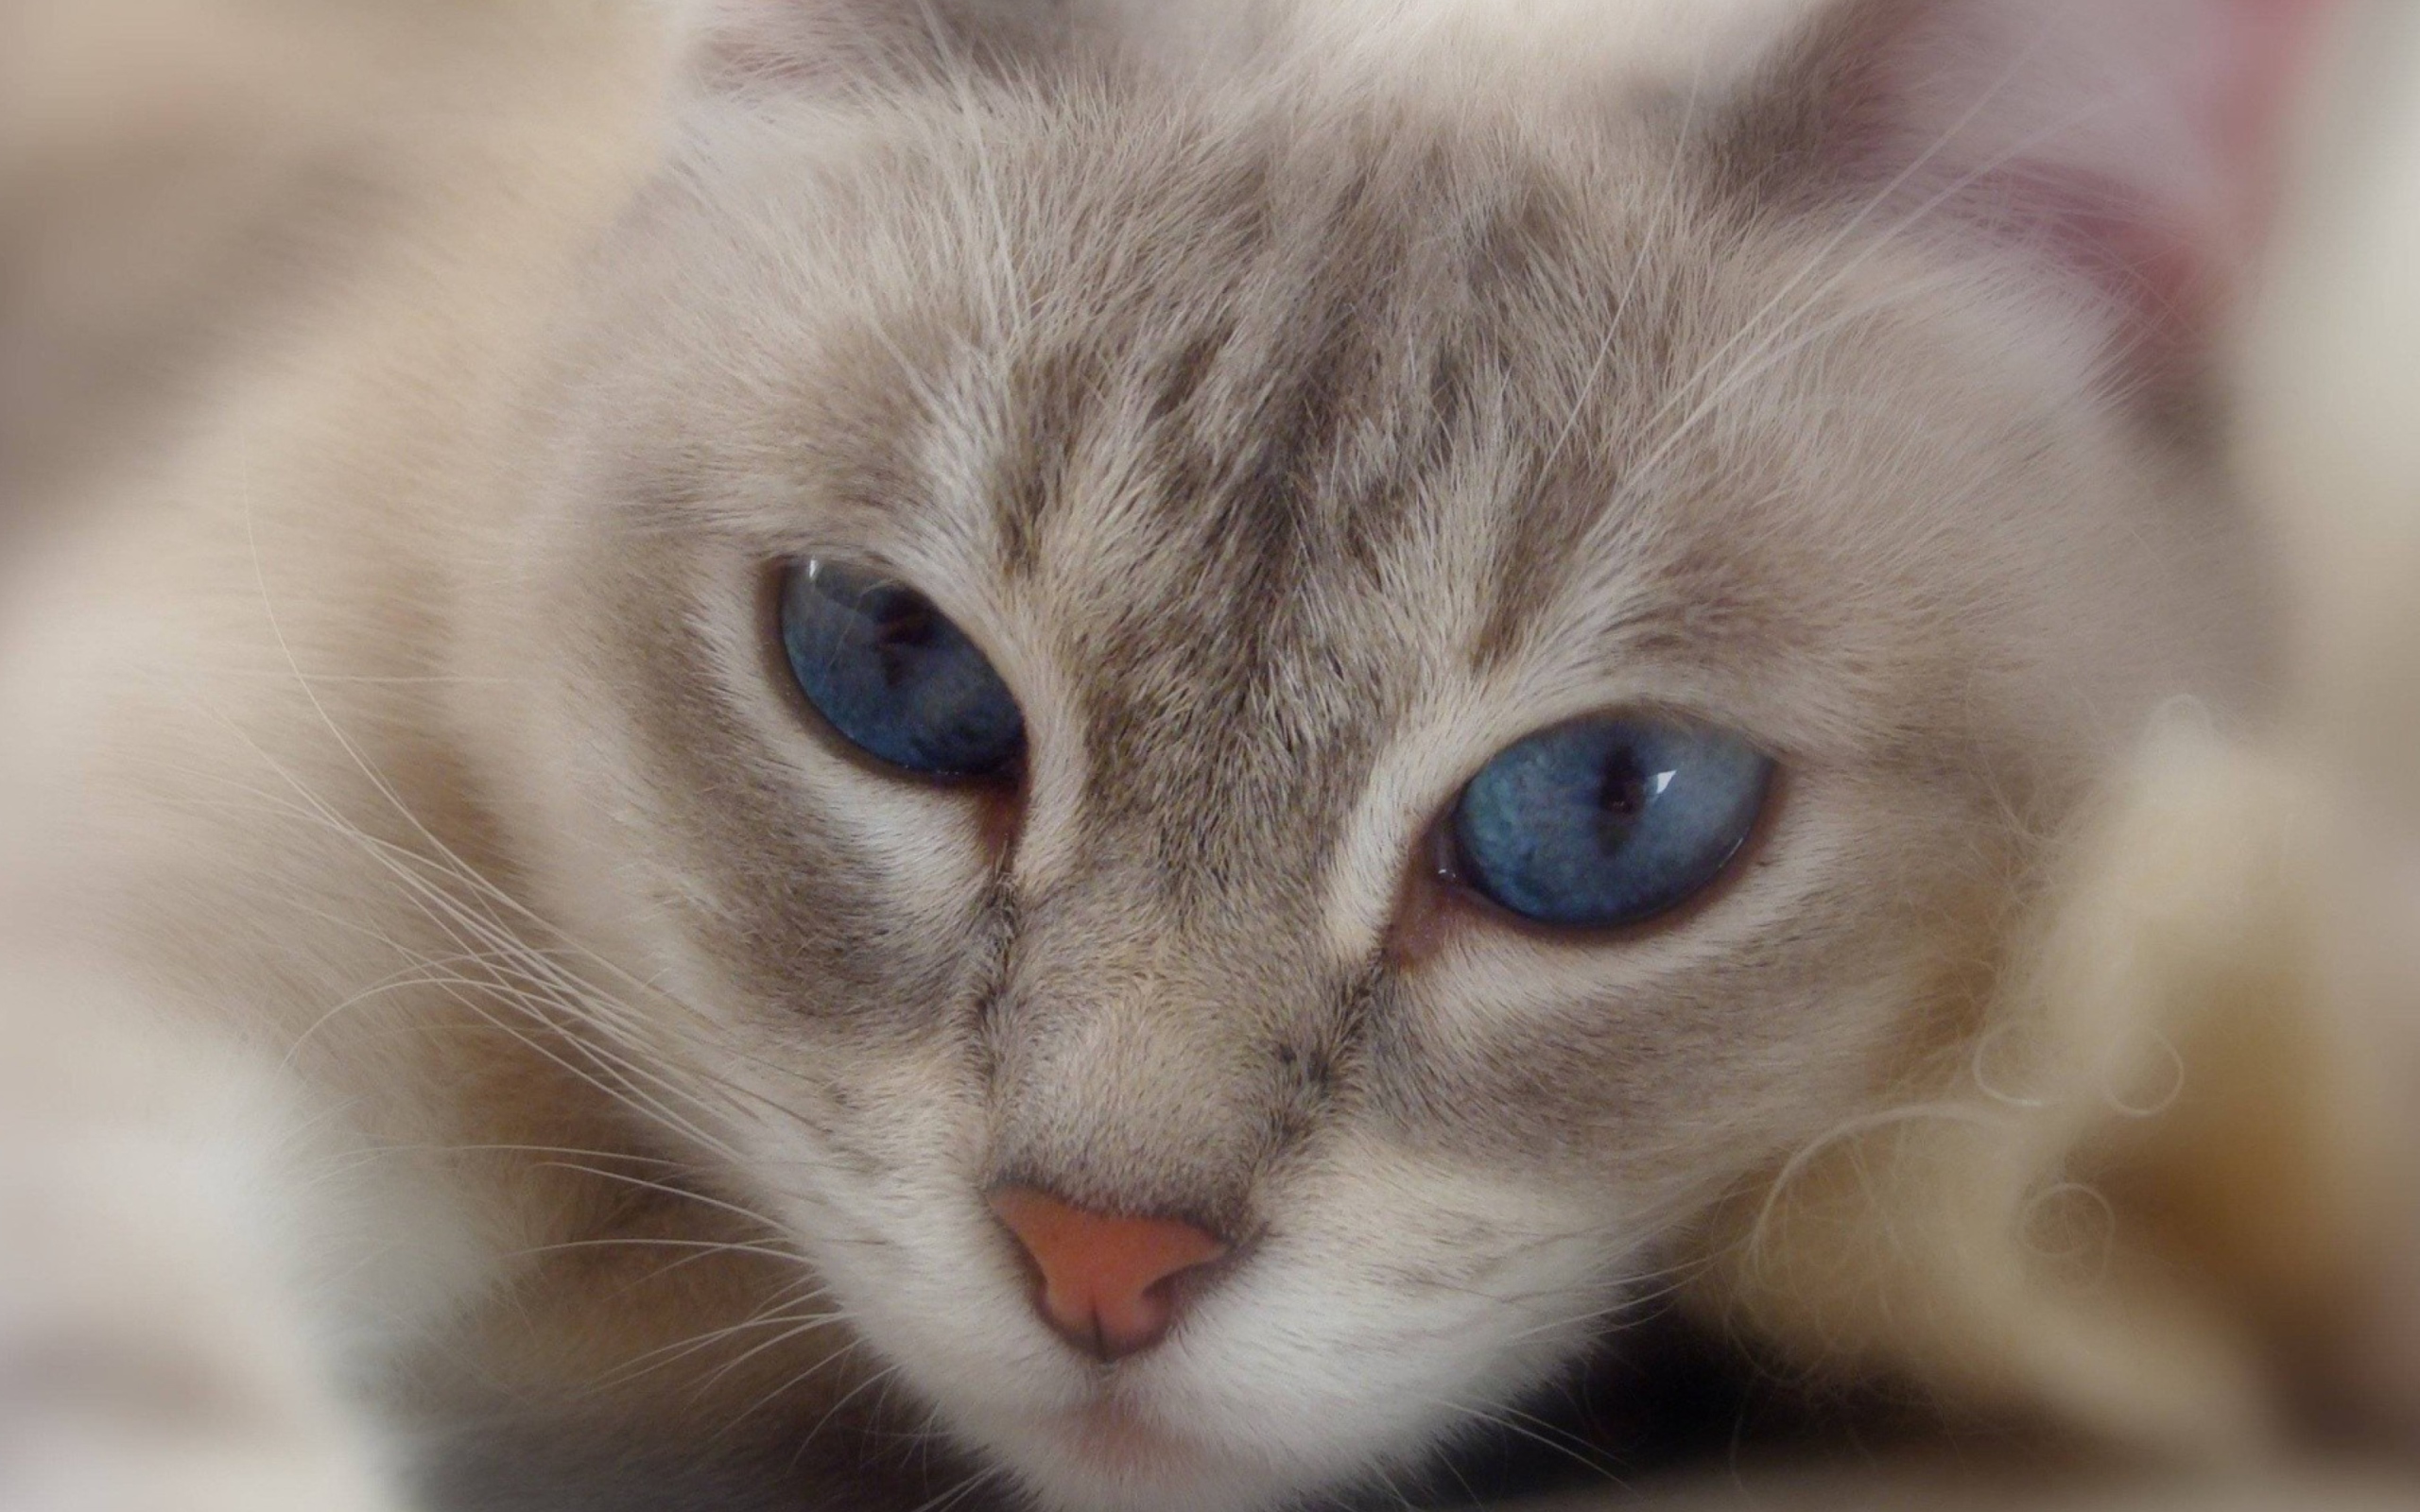 Cat With Blue Eyes wallpaper 2560x1600